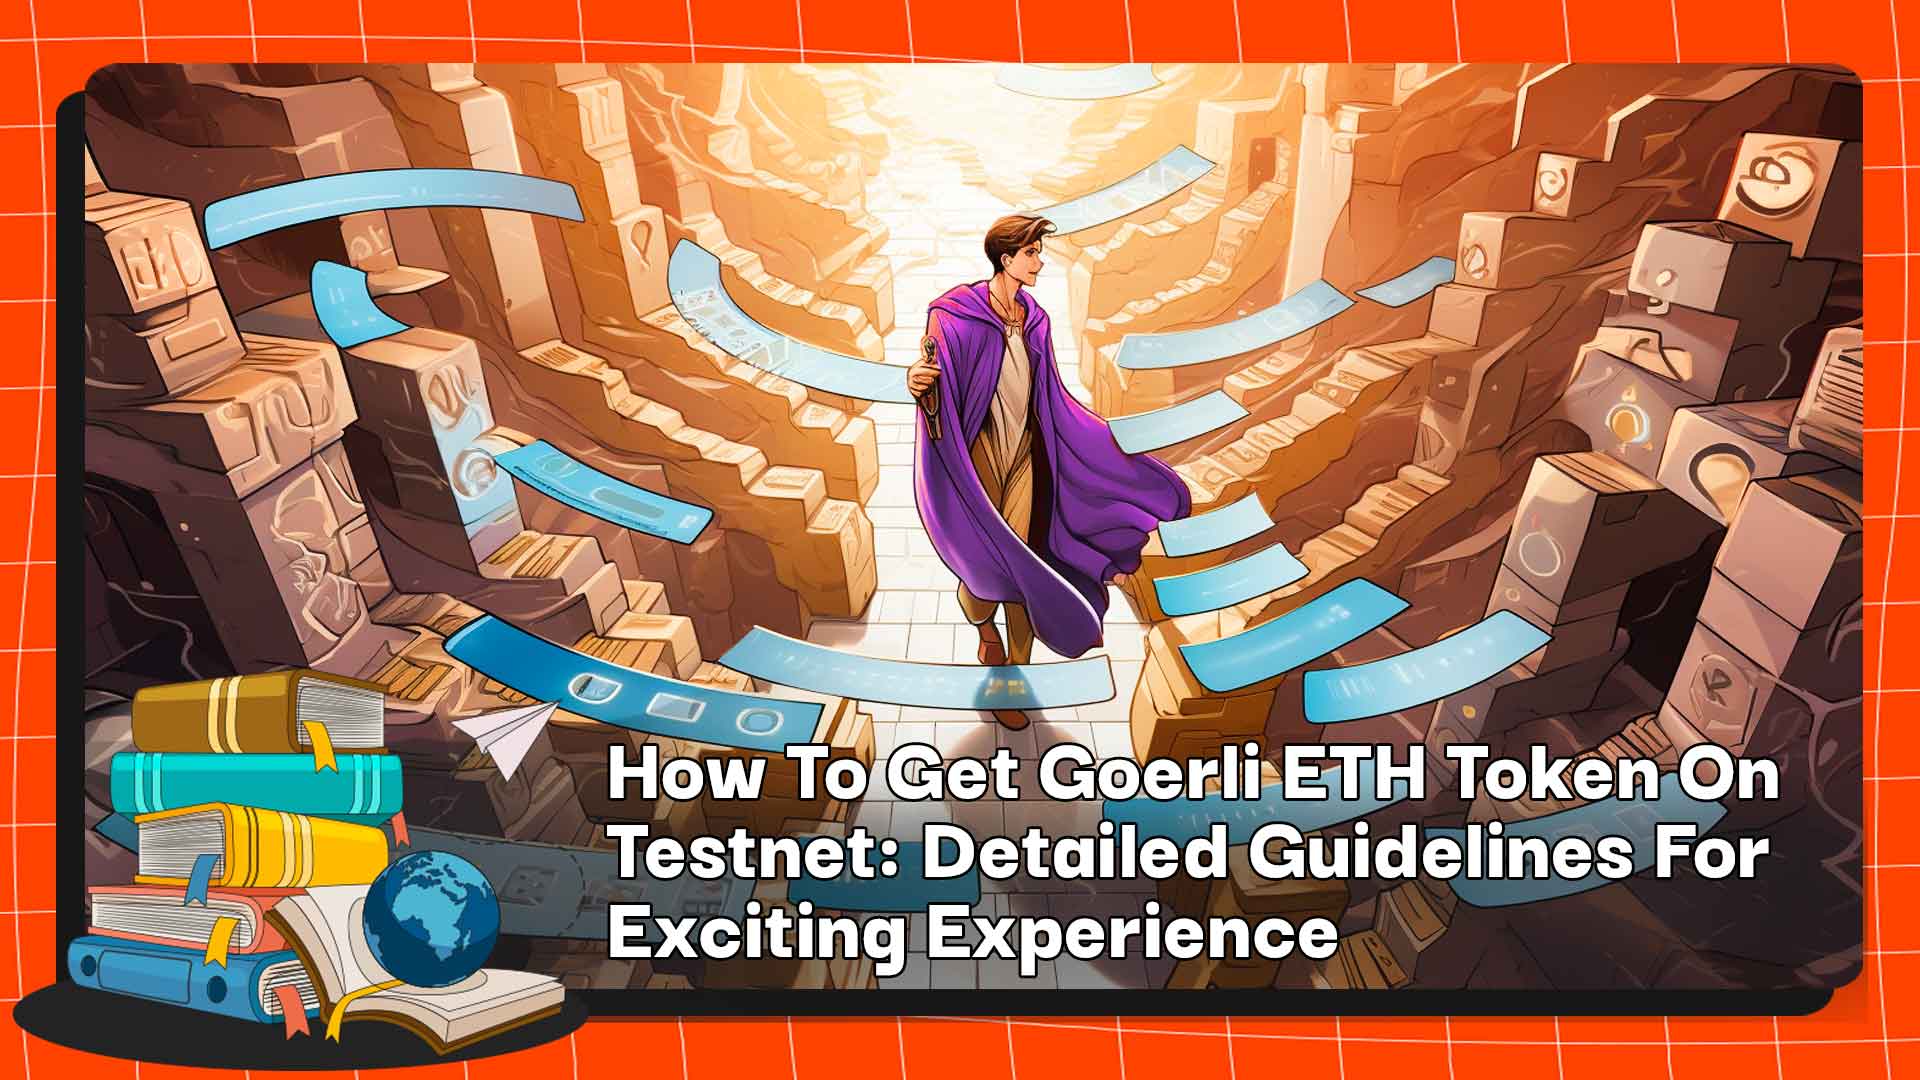 How To Get Goerli ETH Token On Testnet: Detailed Guidelines For Exciting Experience